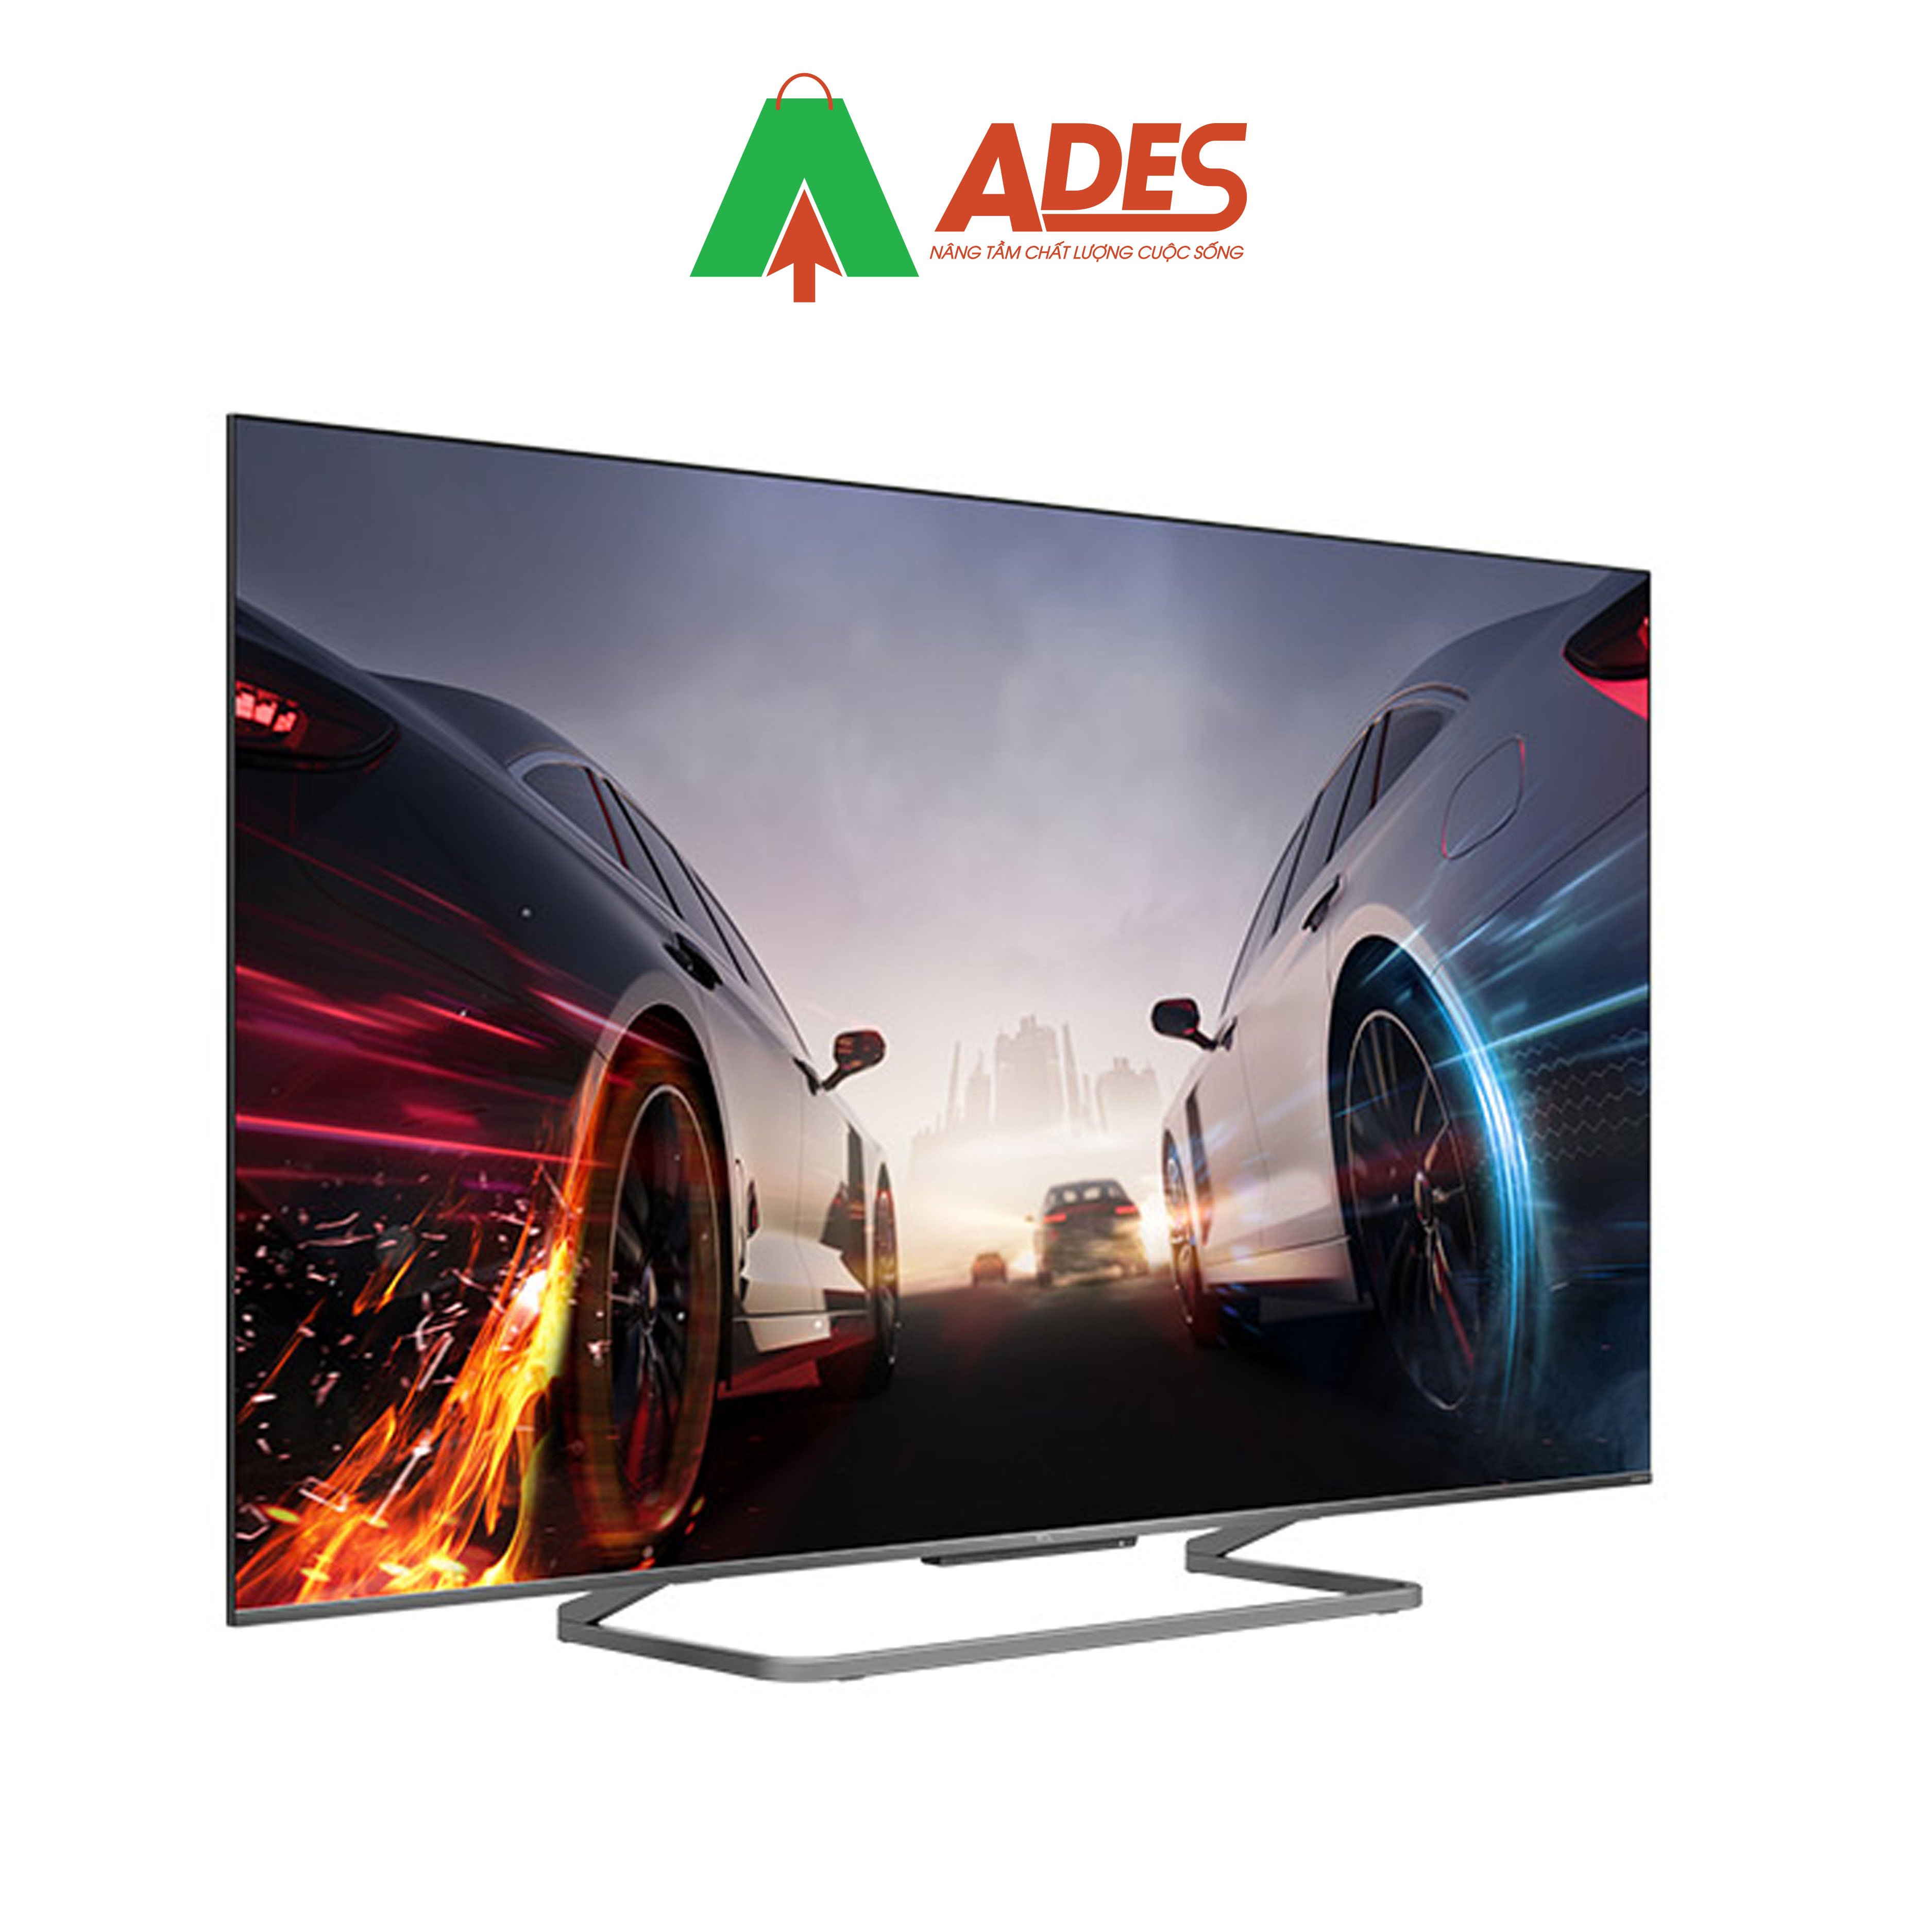 Hinh anh thuc te Android TiVi TCL 55 Inch 55C728